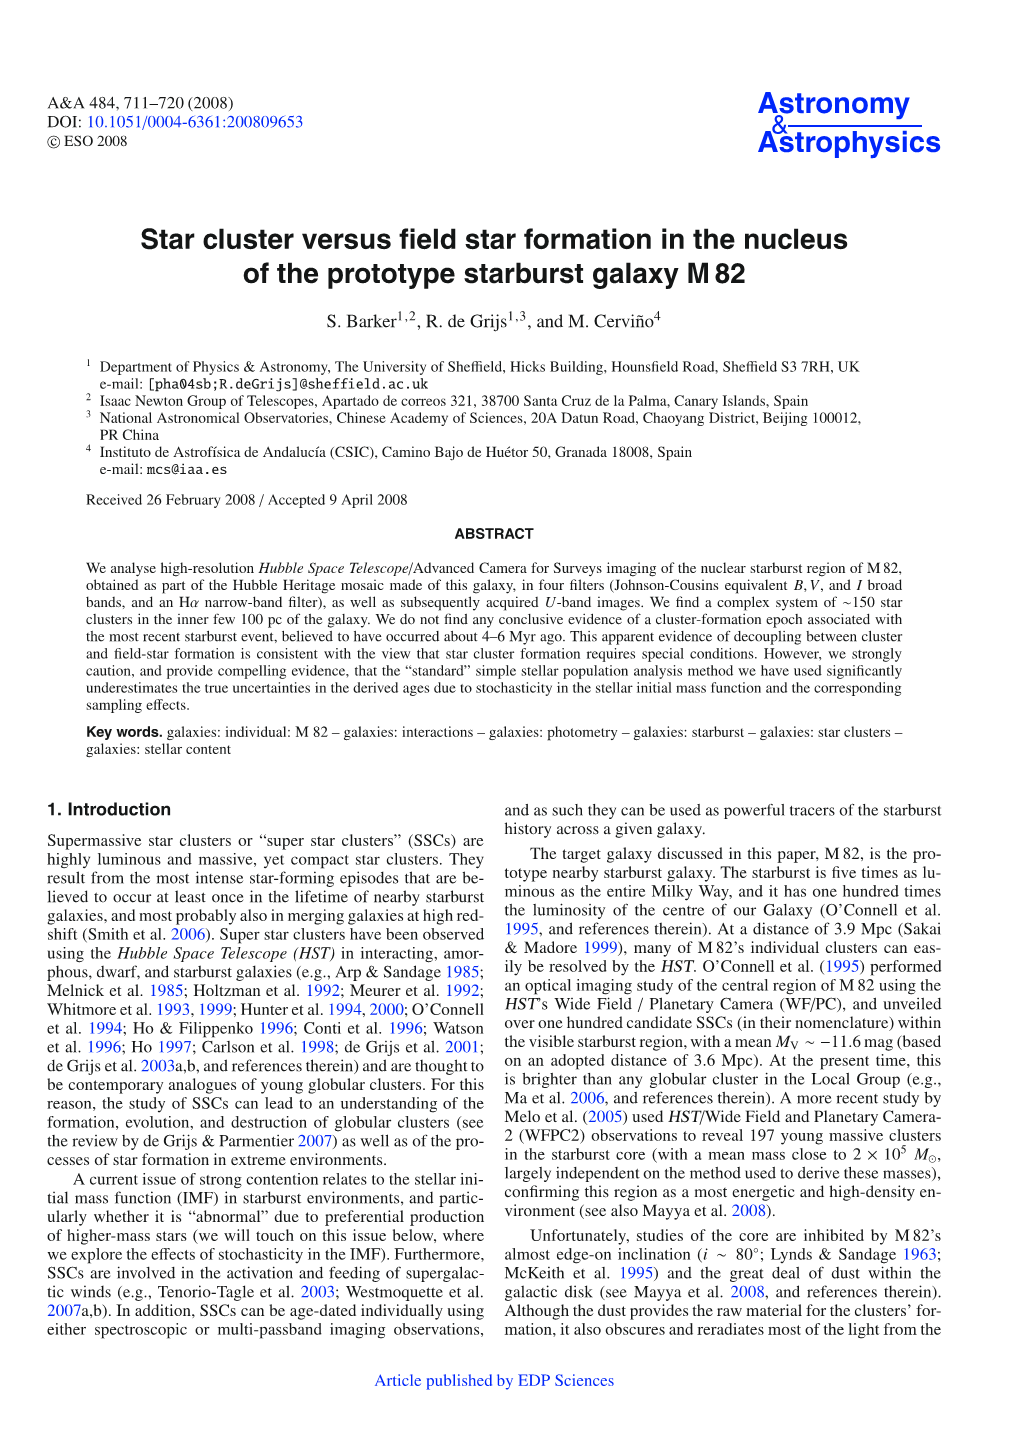 Star Cluster Versus Field Star Formation in the Nucleus of the Prototype